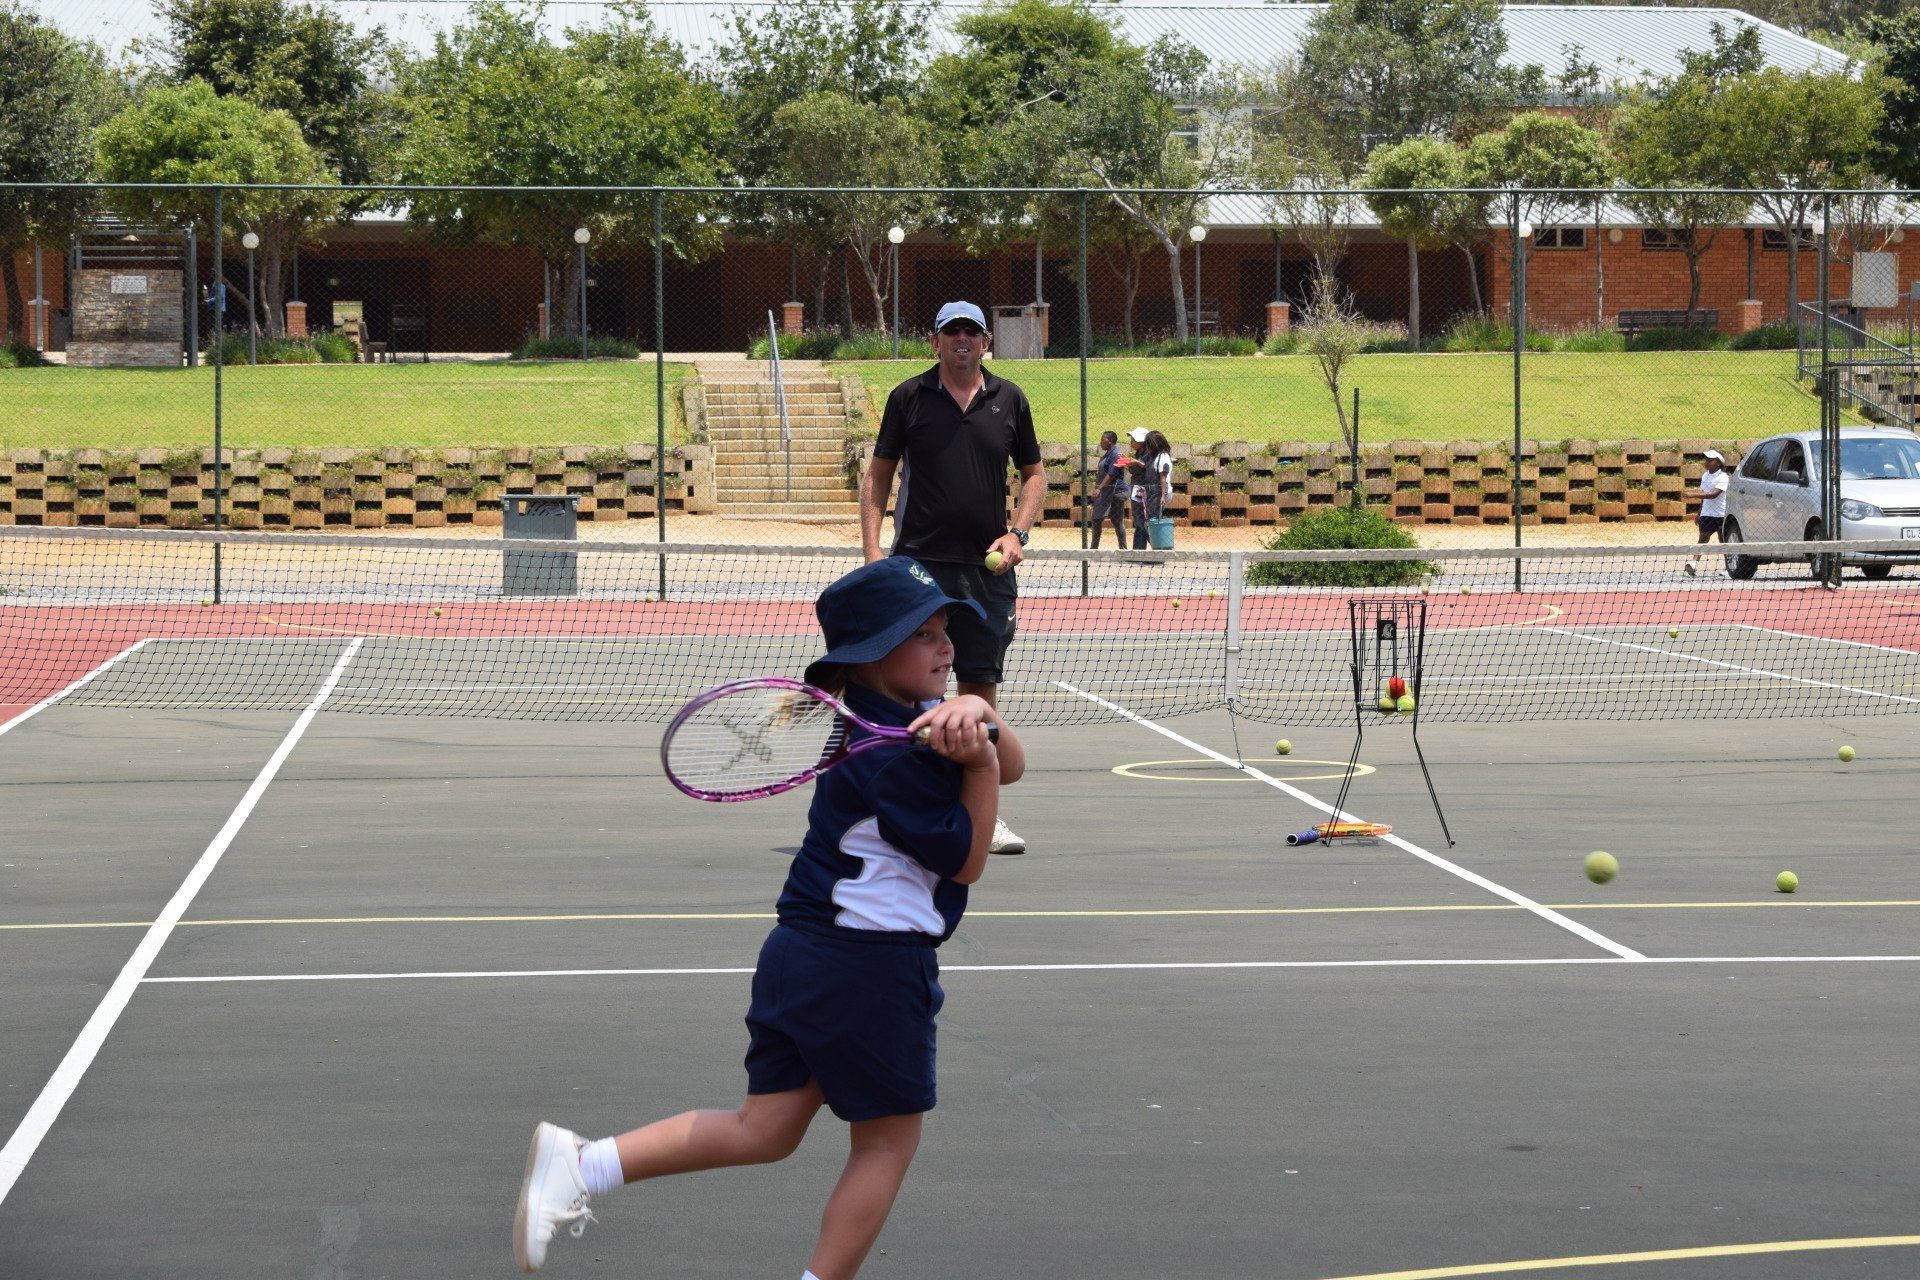 a young girl is swinging a tennis racket on a tennis court